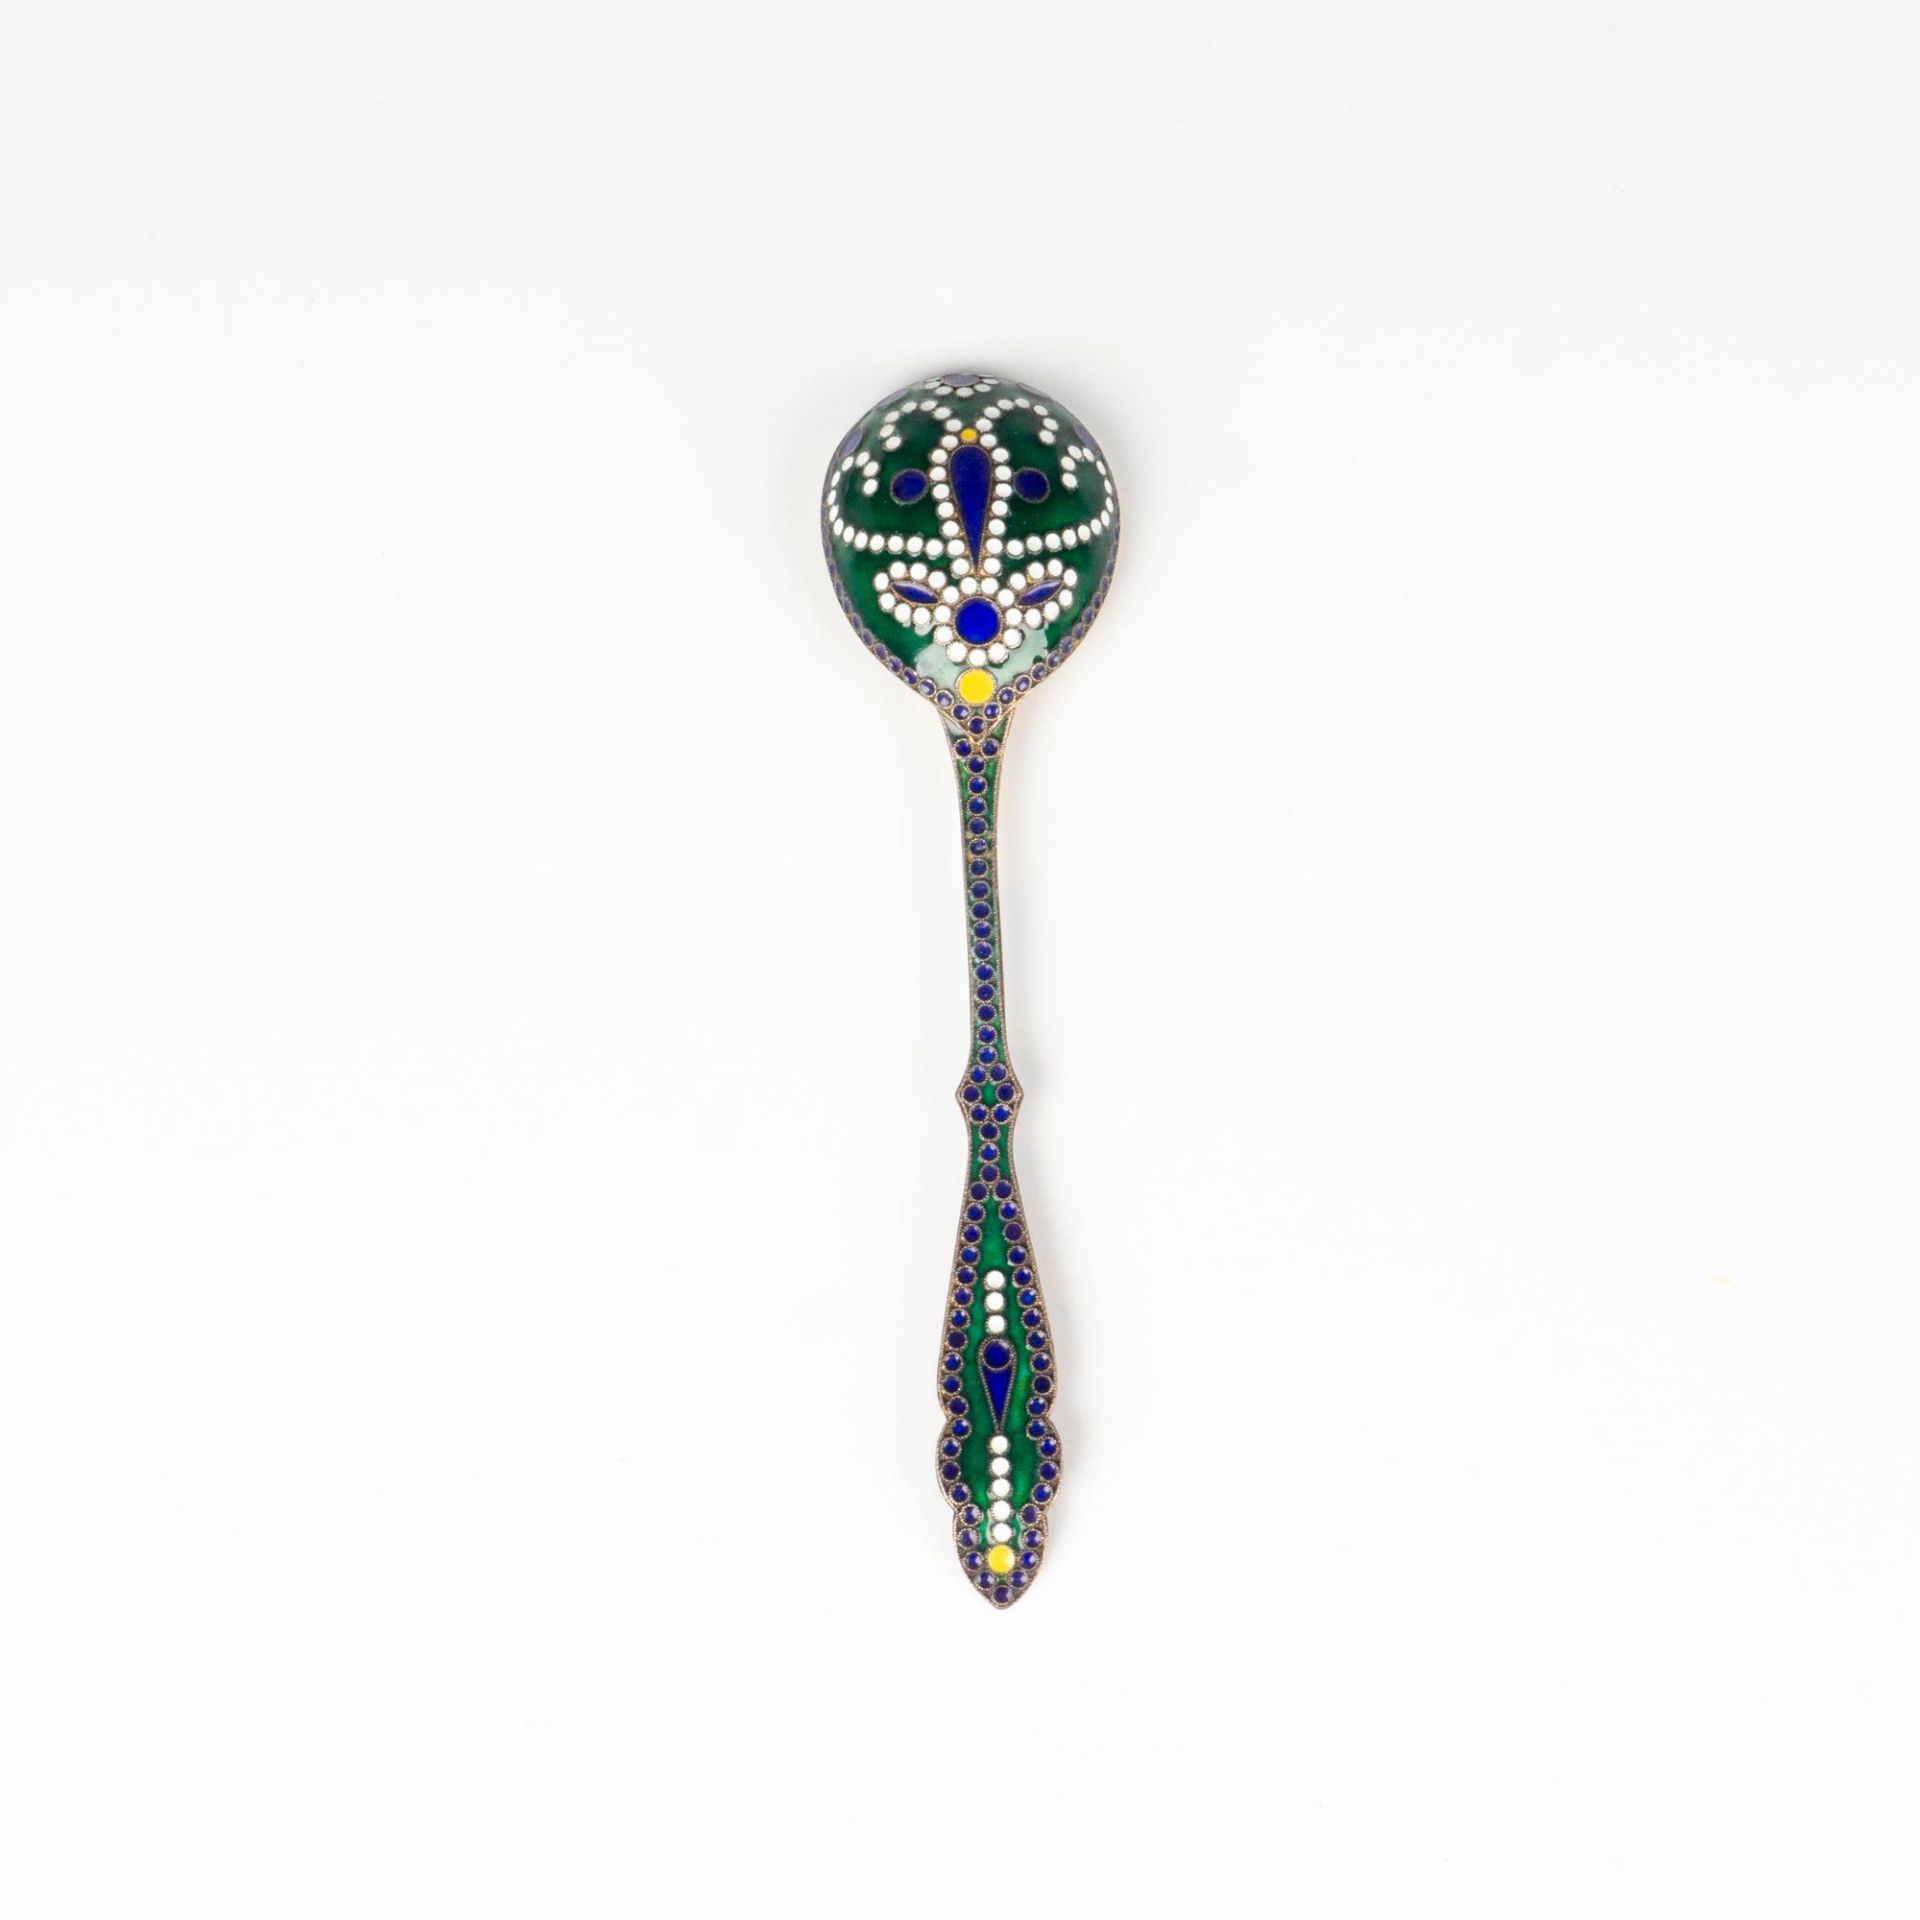 Rare Russian Cloisonne Enamel Gilded Silver Spoon - Image 3 of 3